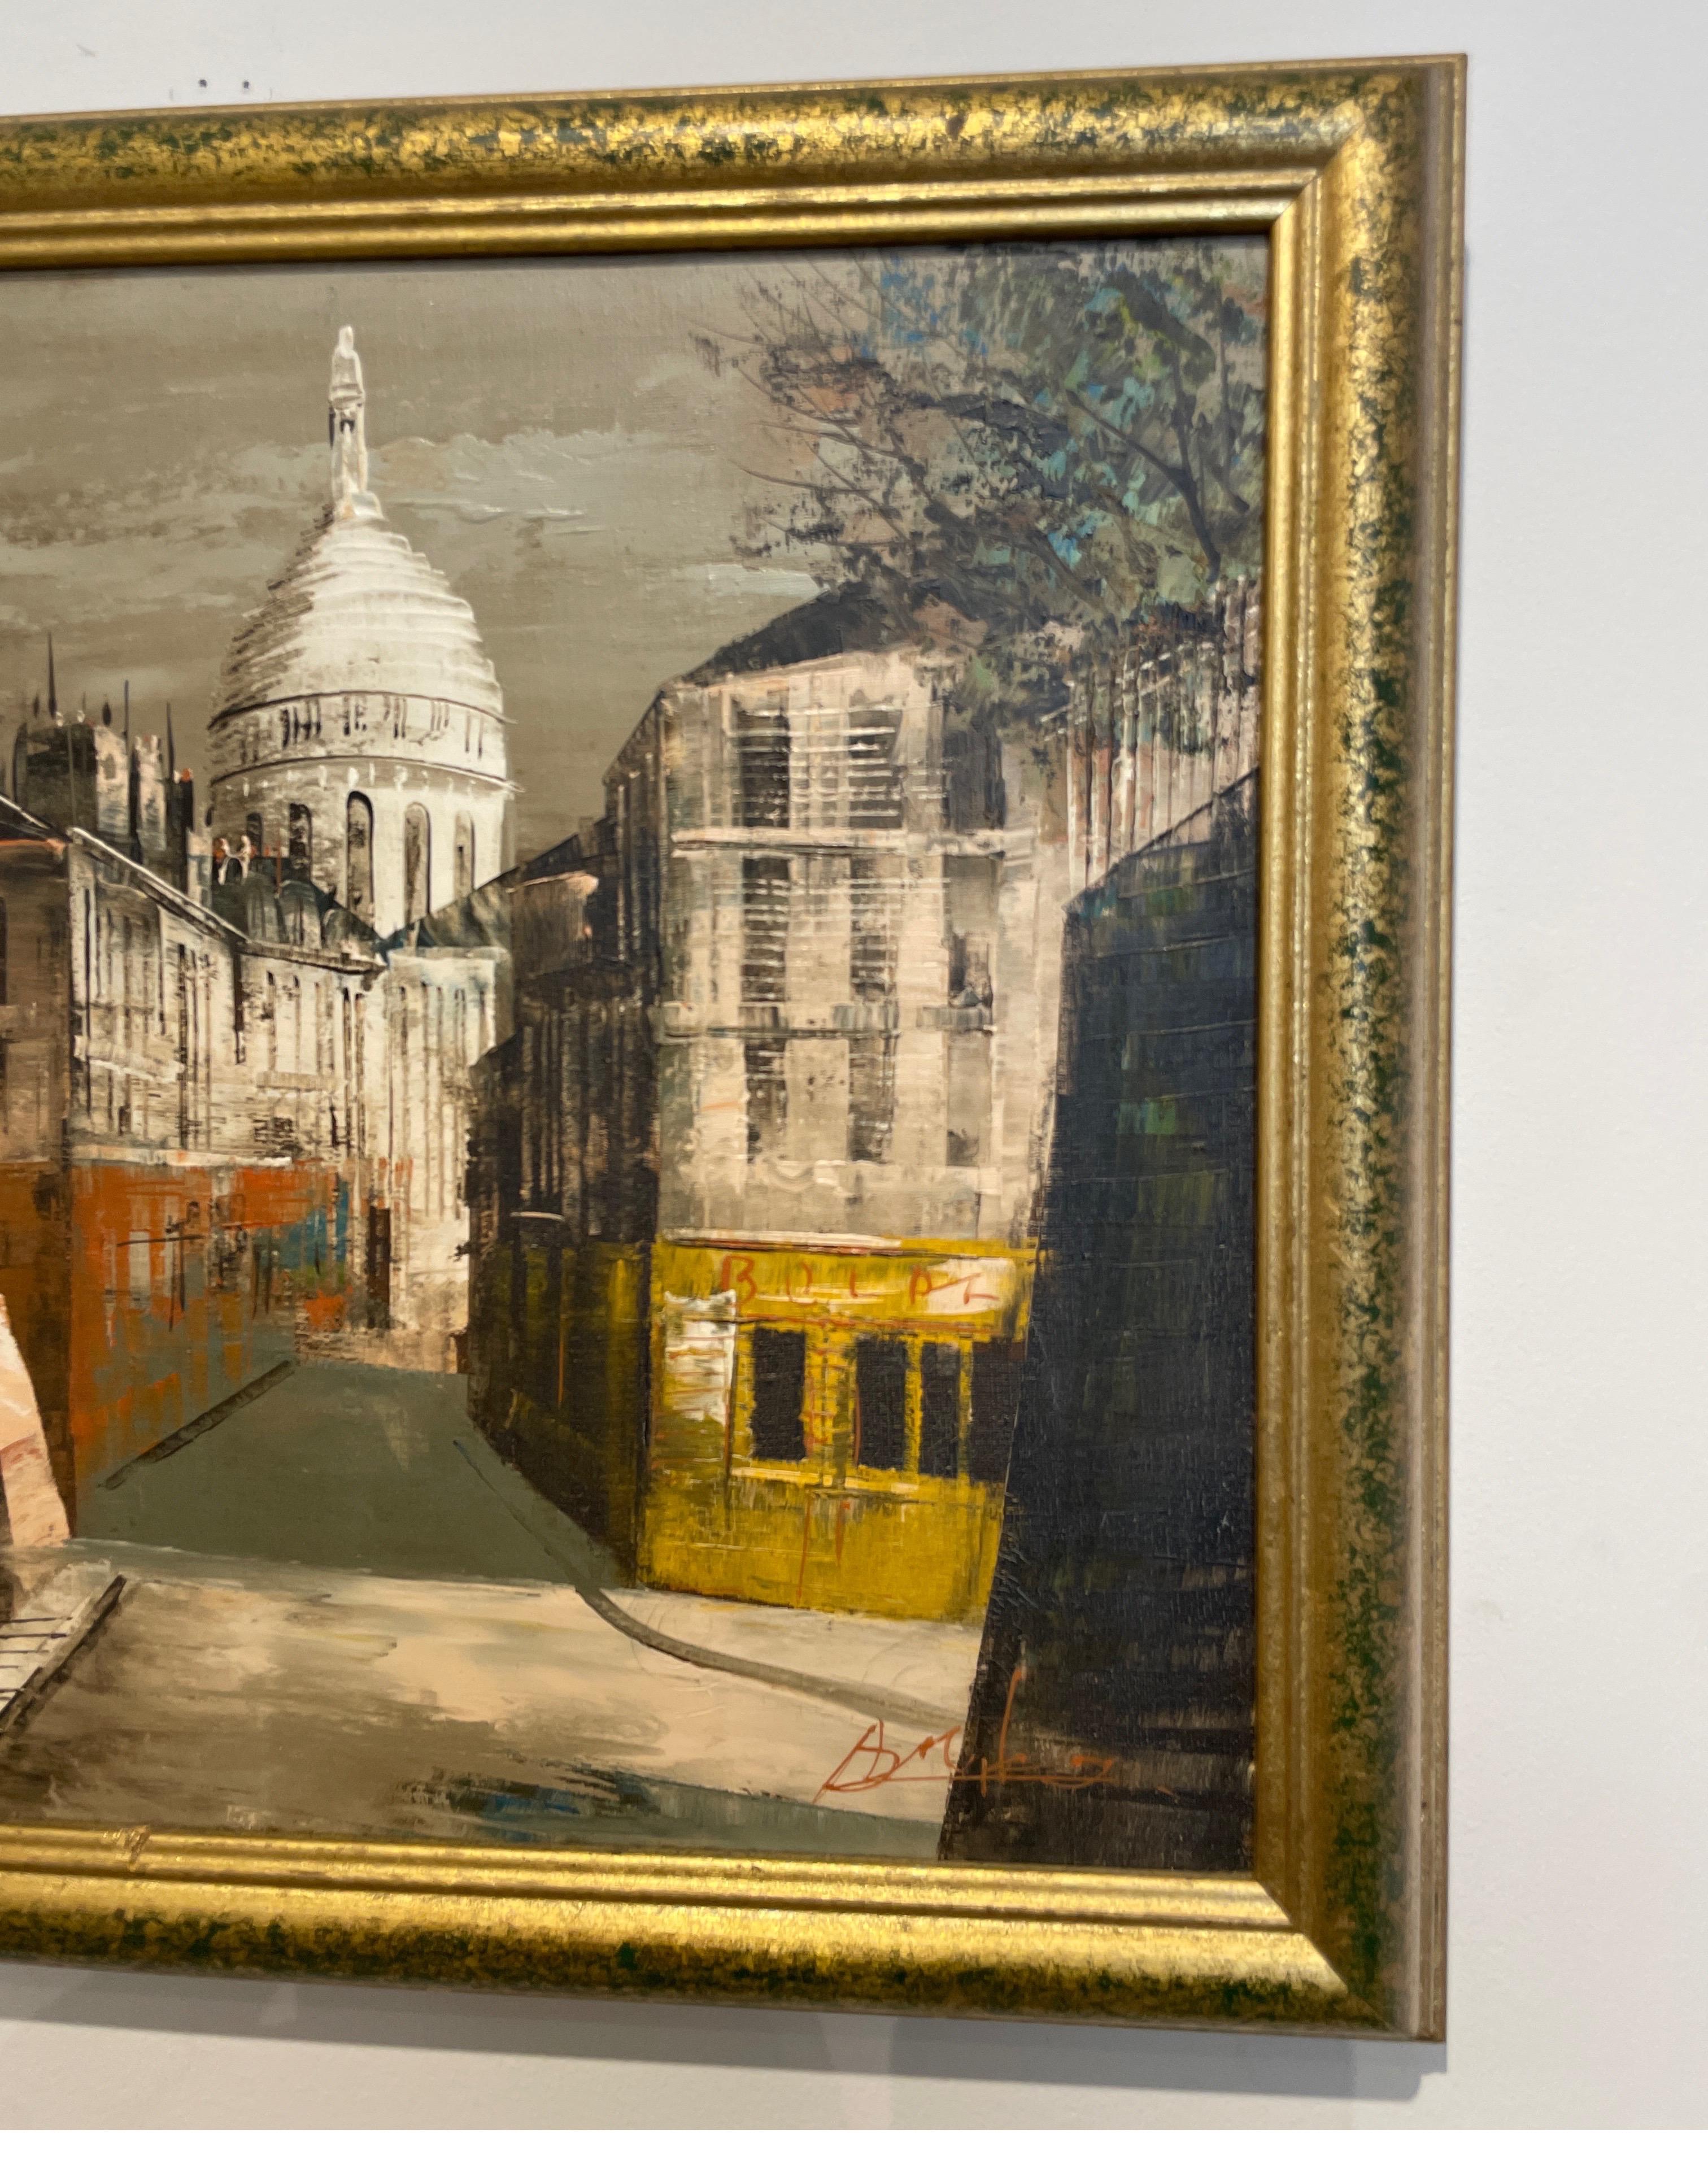 Lovely Parisian streetscape oil painting in the style of Buffet. Very well executed vintage piece. A very decorative addition to any setting.